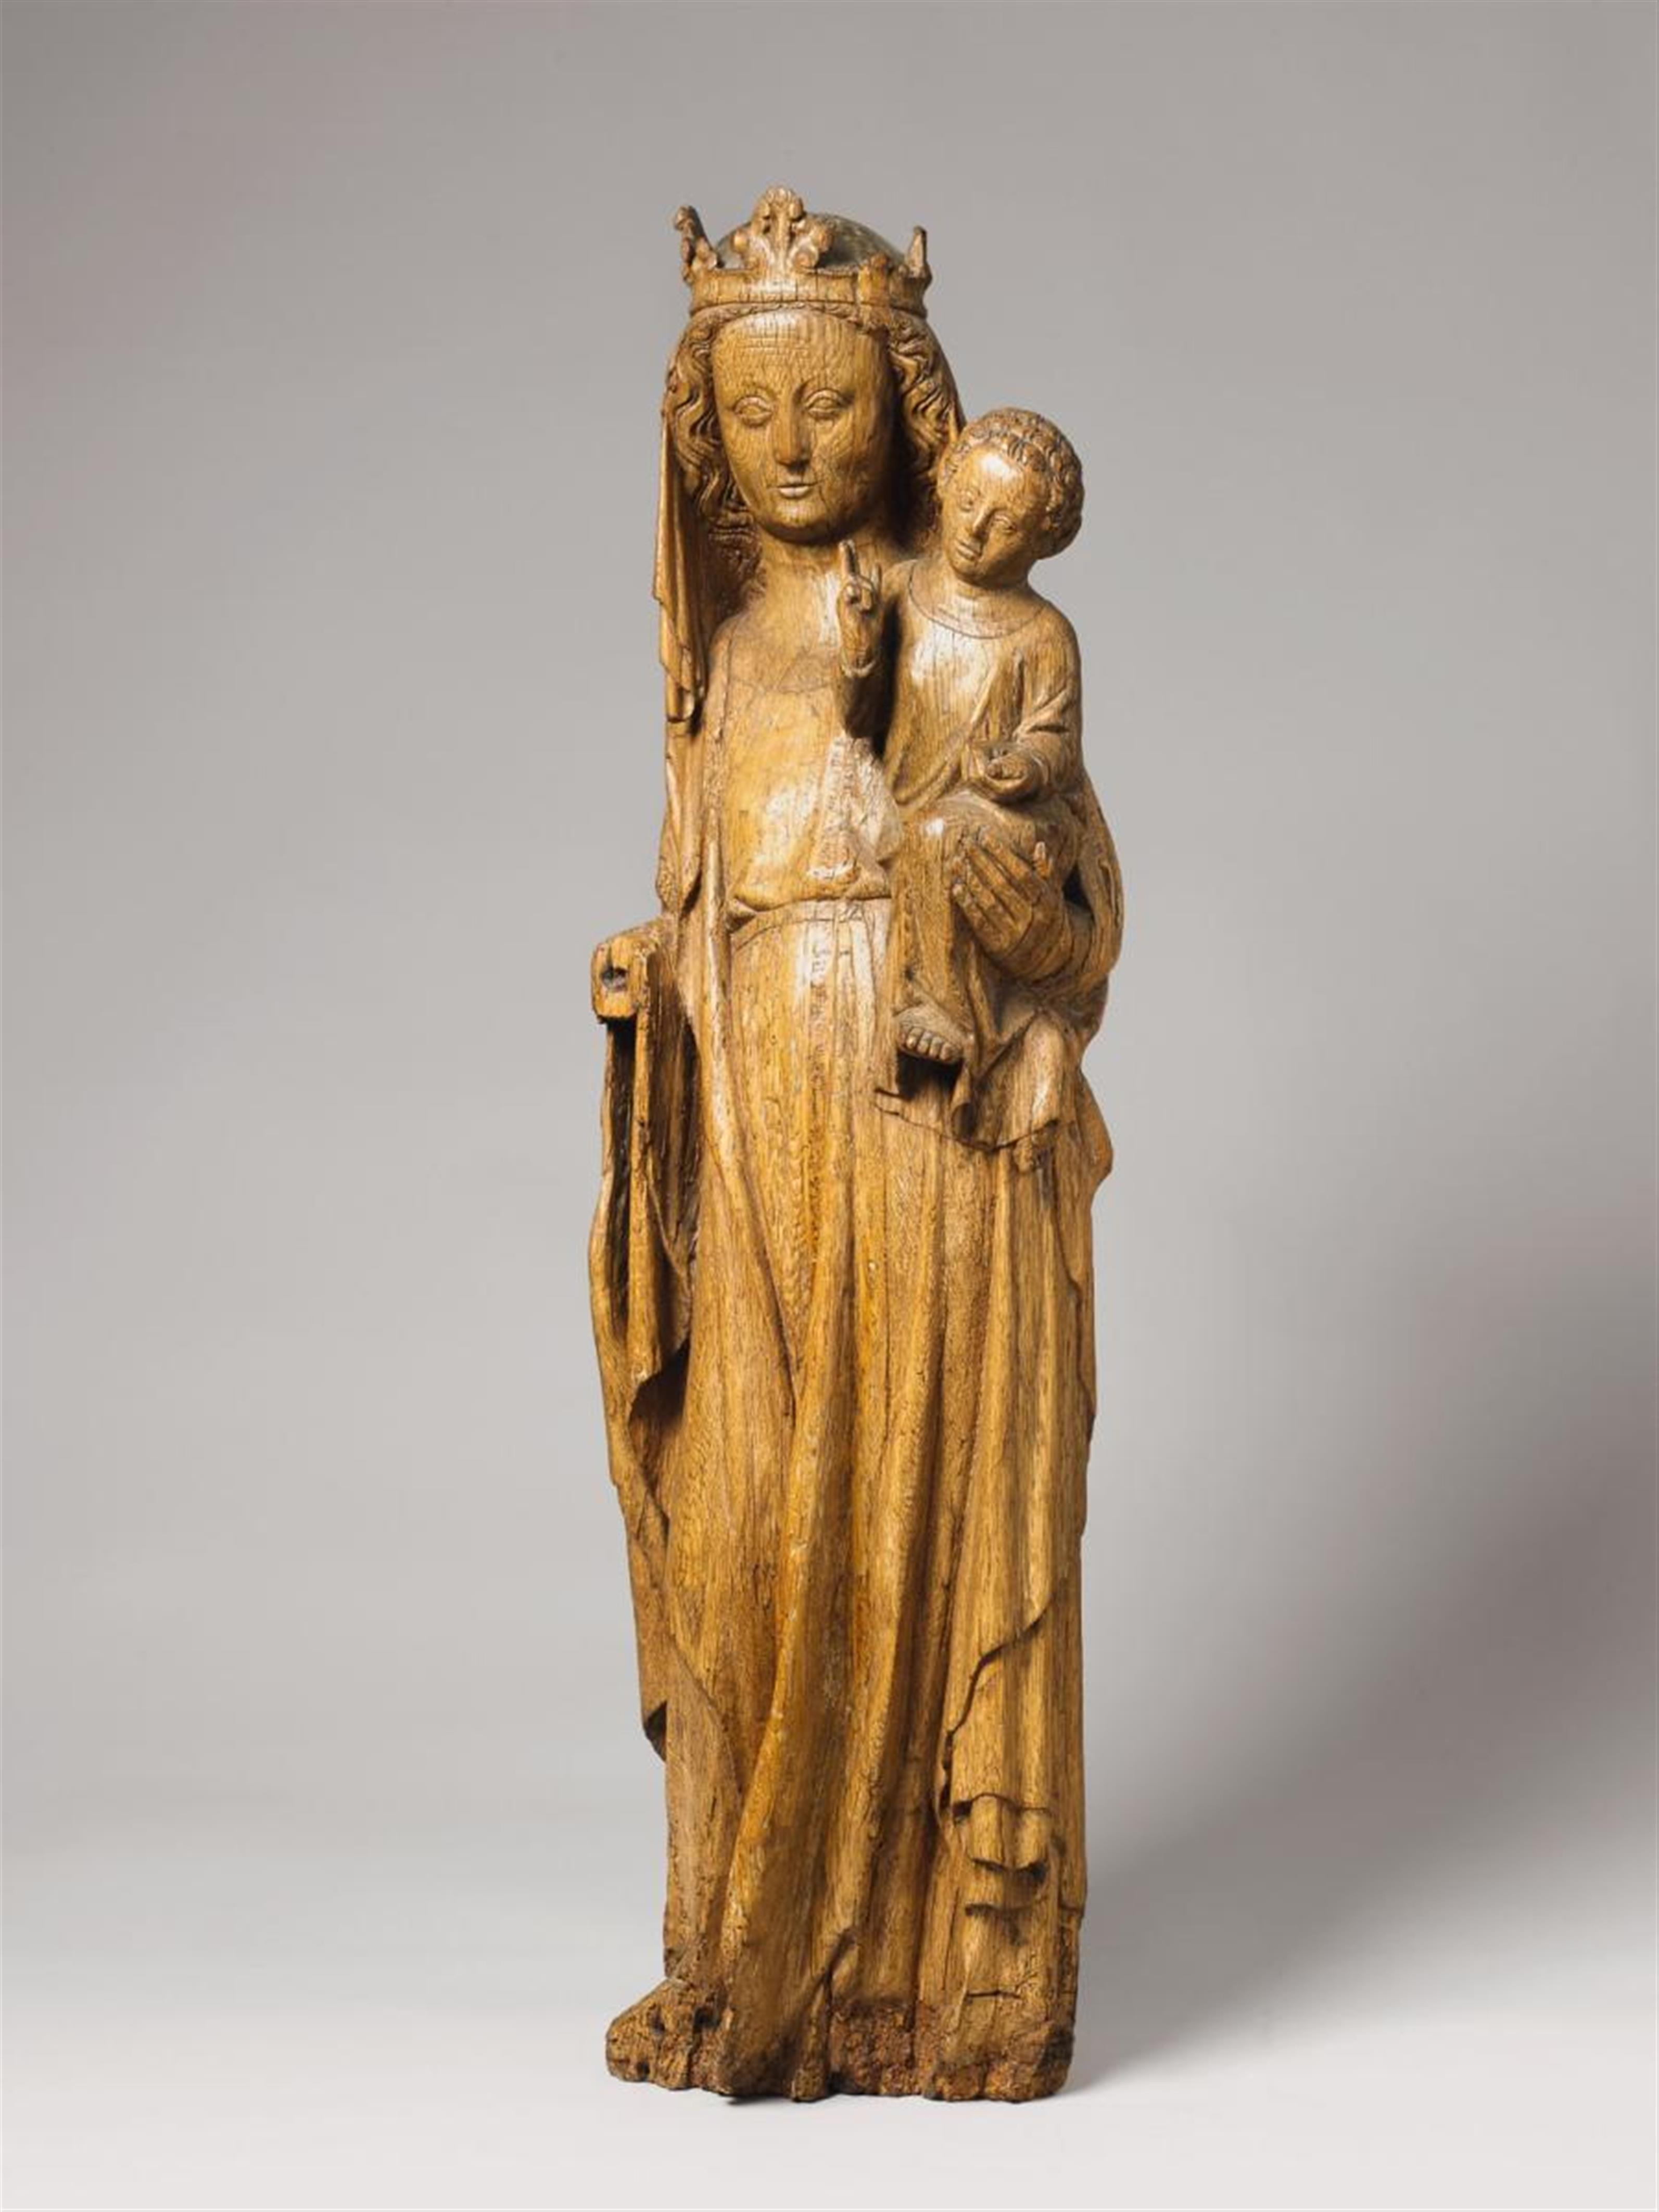 A NORTHERN FRENCH OAK FIGURE OF THE VIRGIN WITH CHILD, CIRCA 1380 - image-1